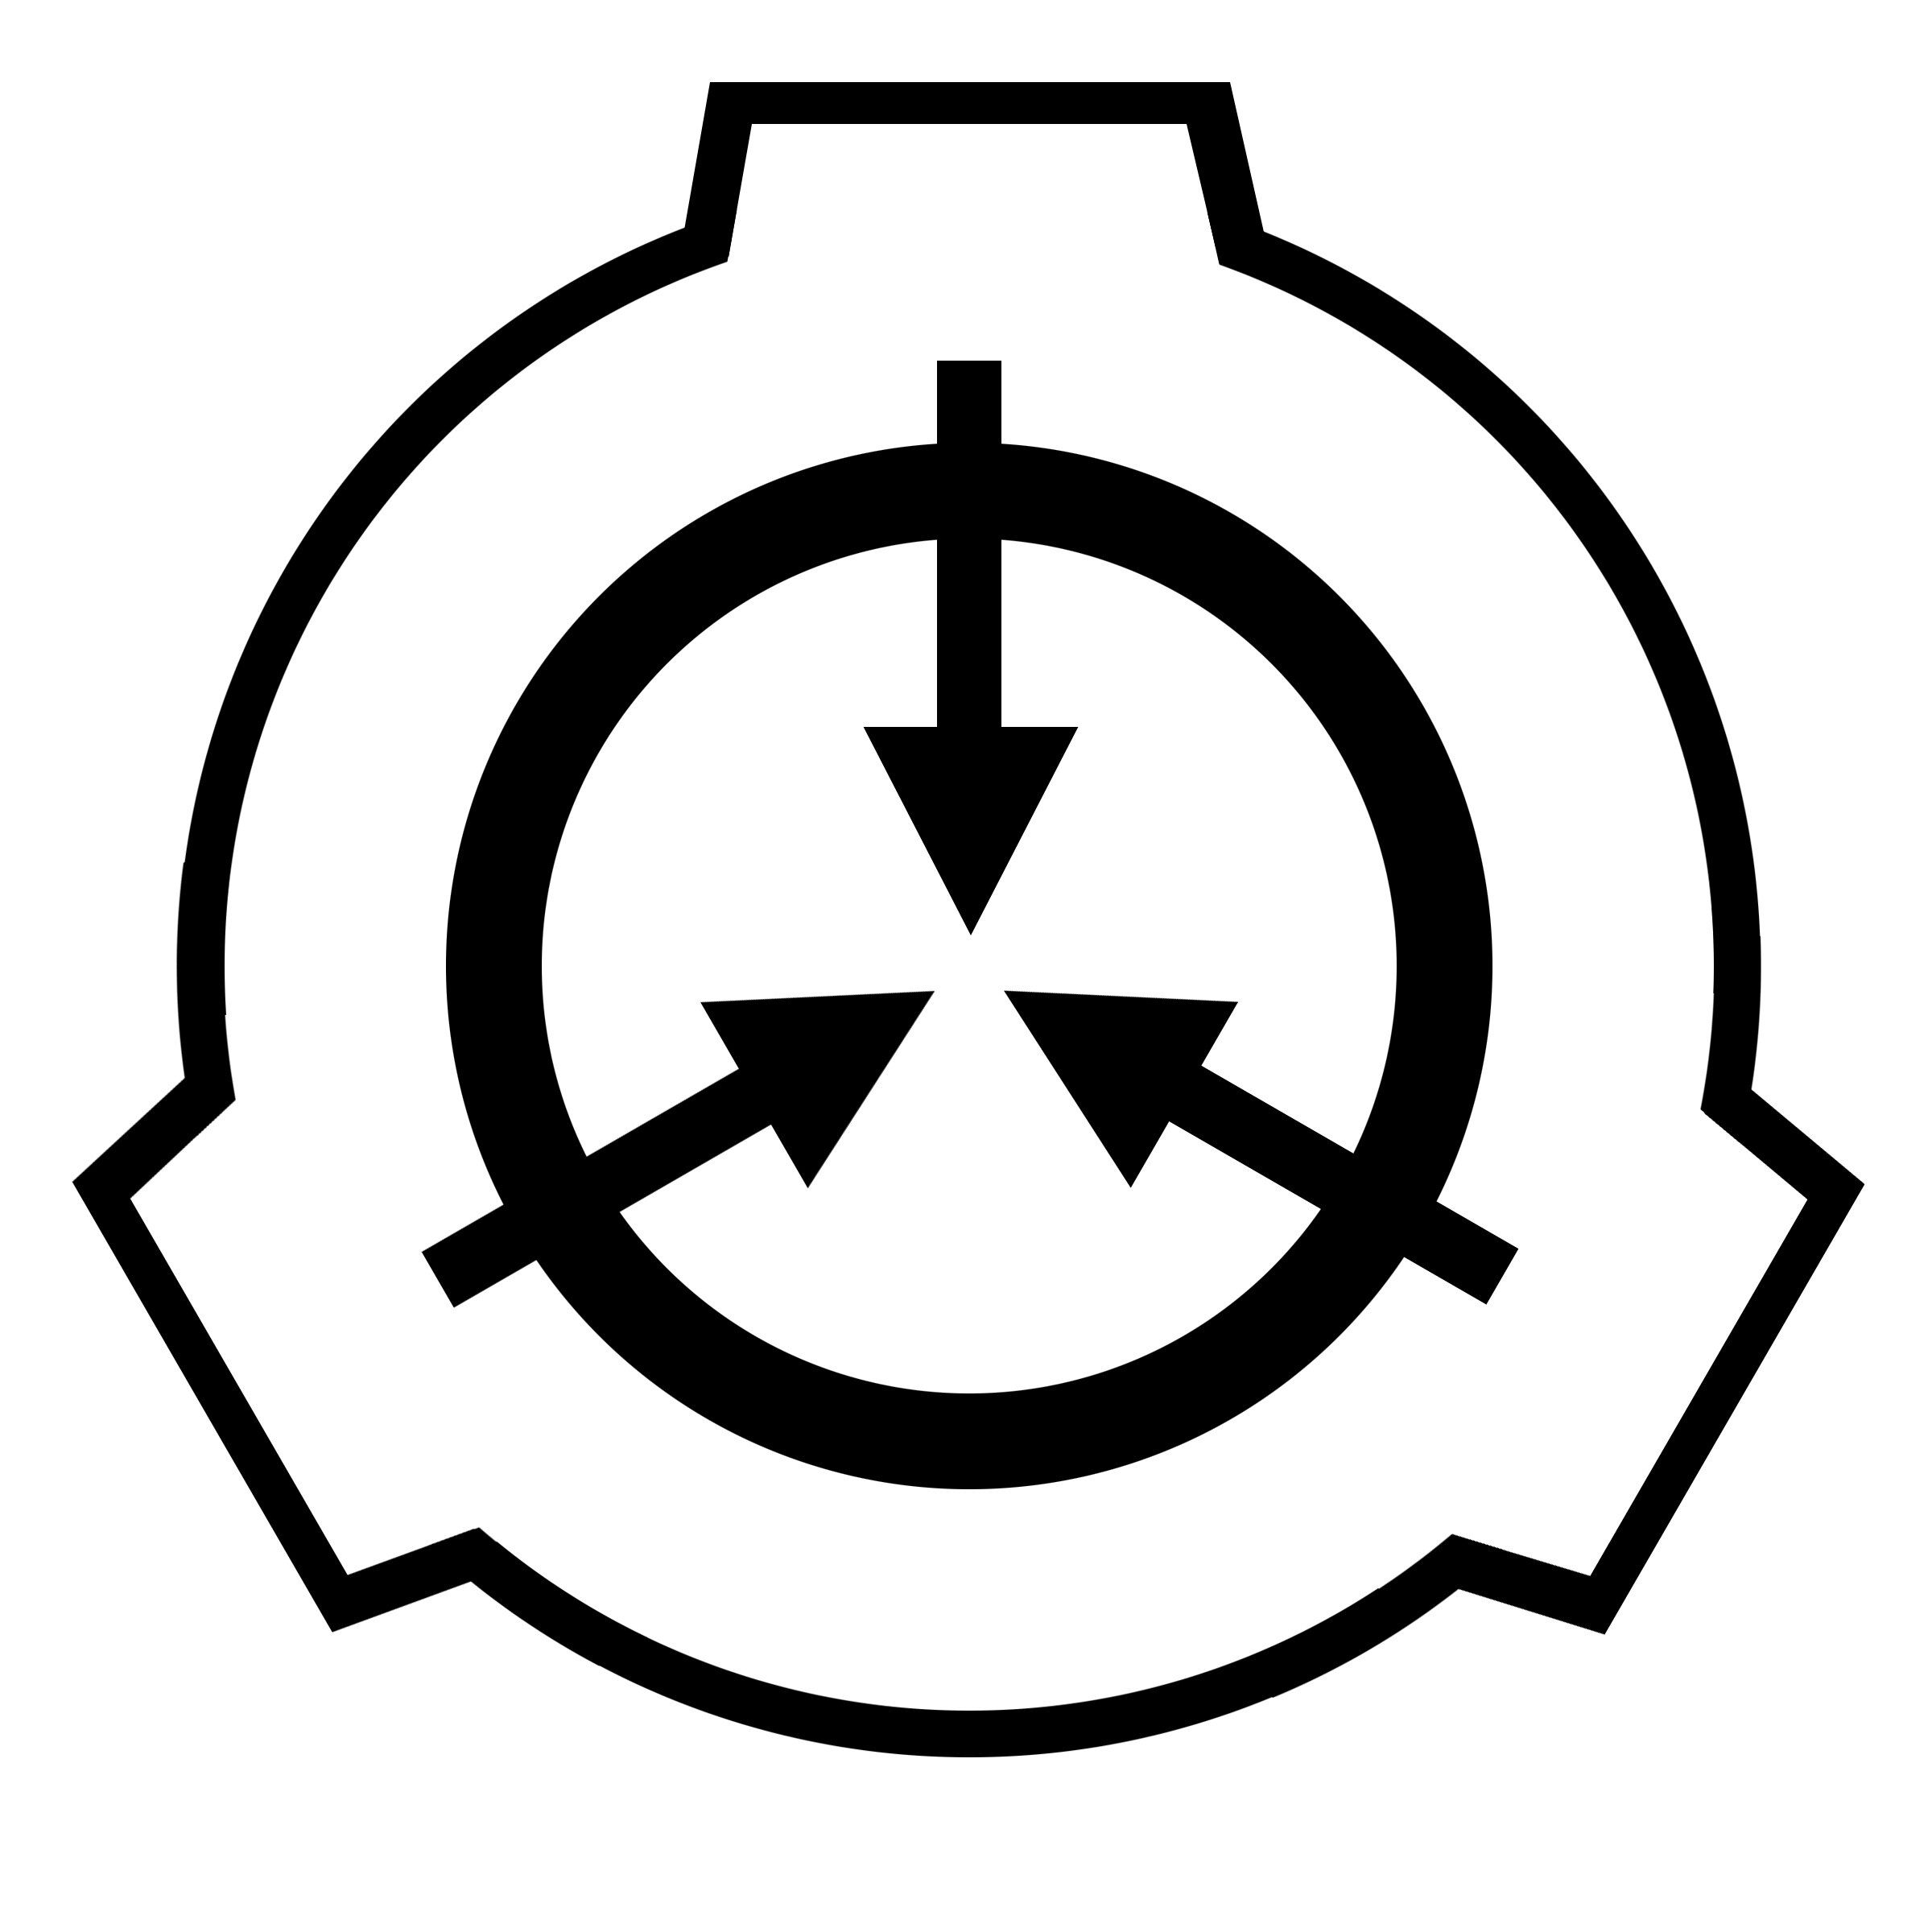 SCP-1123, SCP: Anomaly Breach 2 Fanmade Wiki